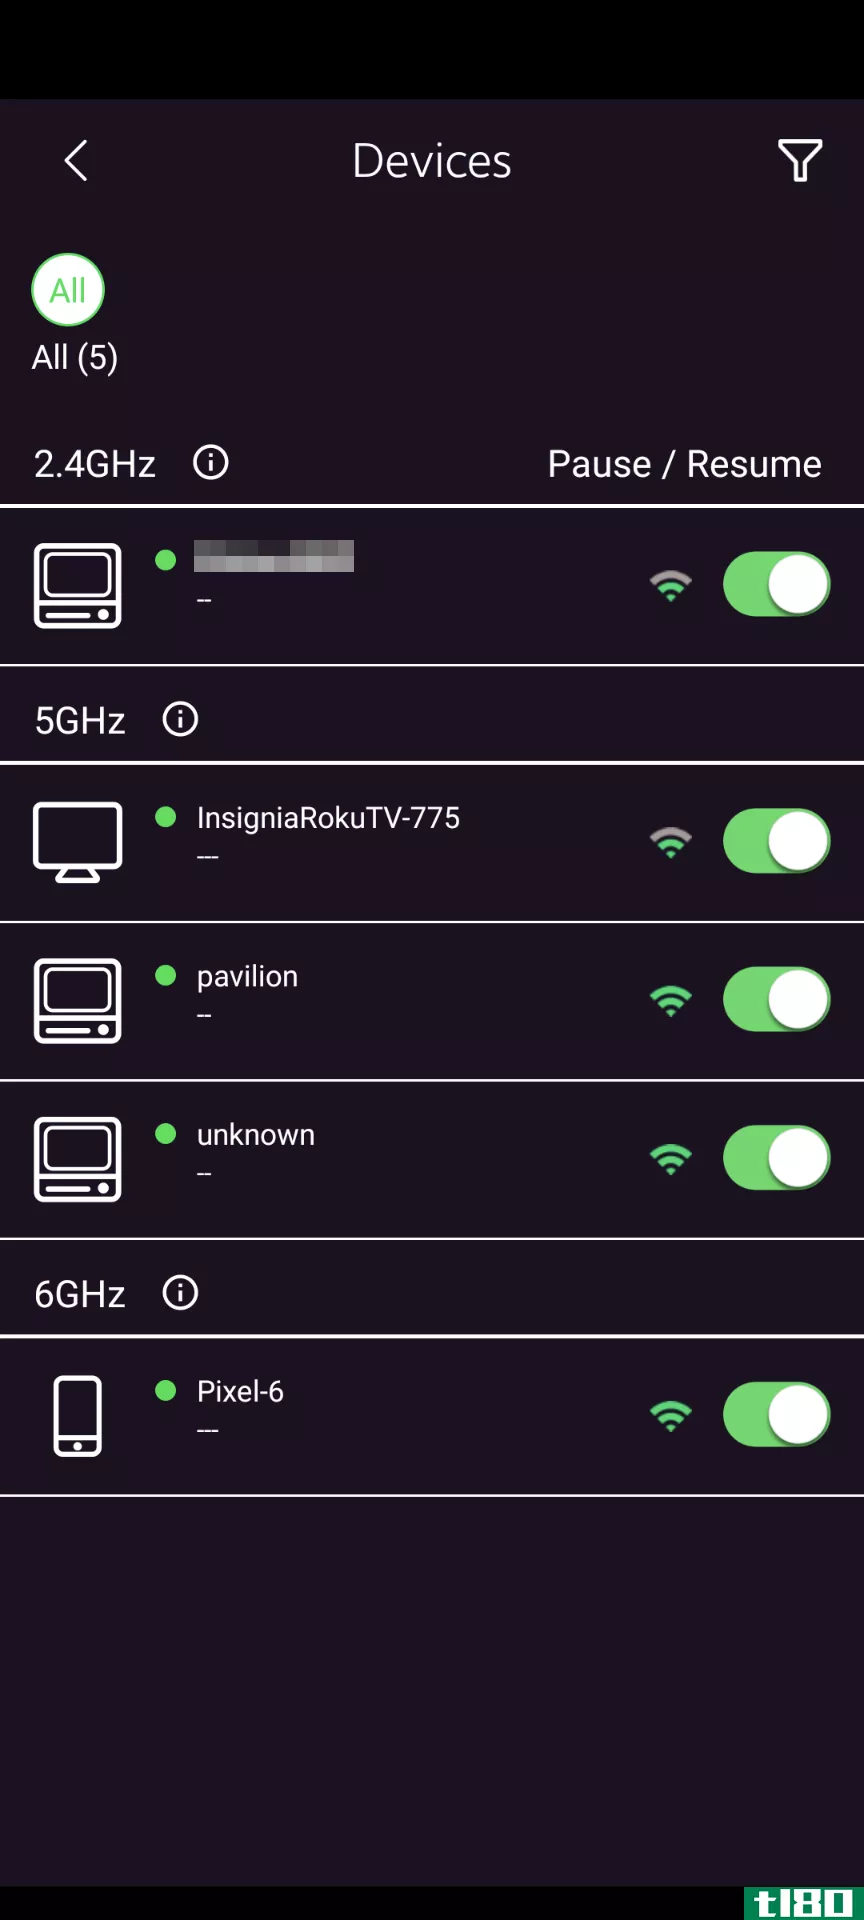 Connected devices listed in the Nighthawk mobile app.